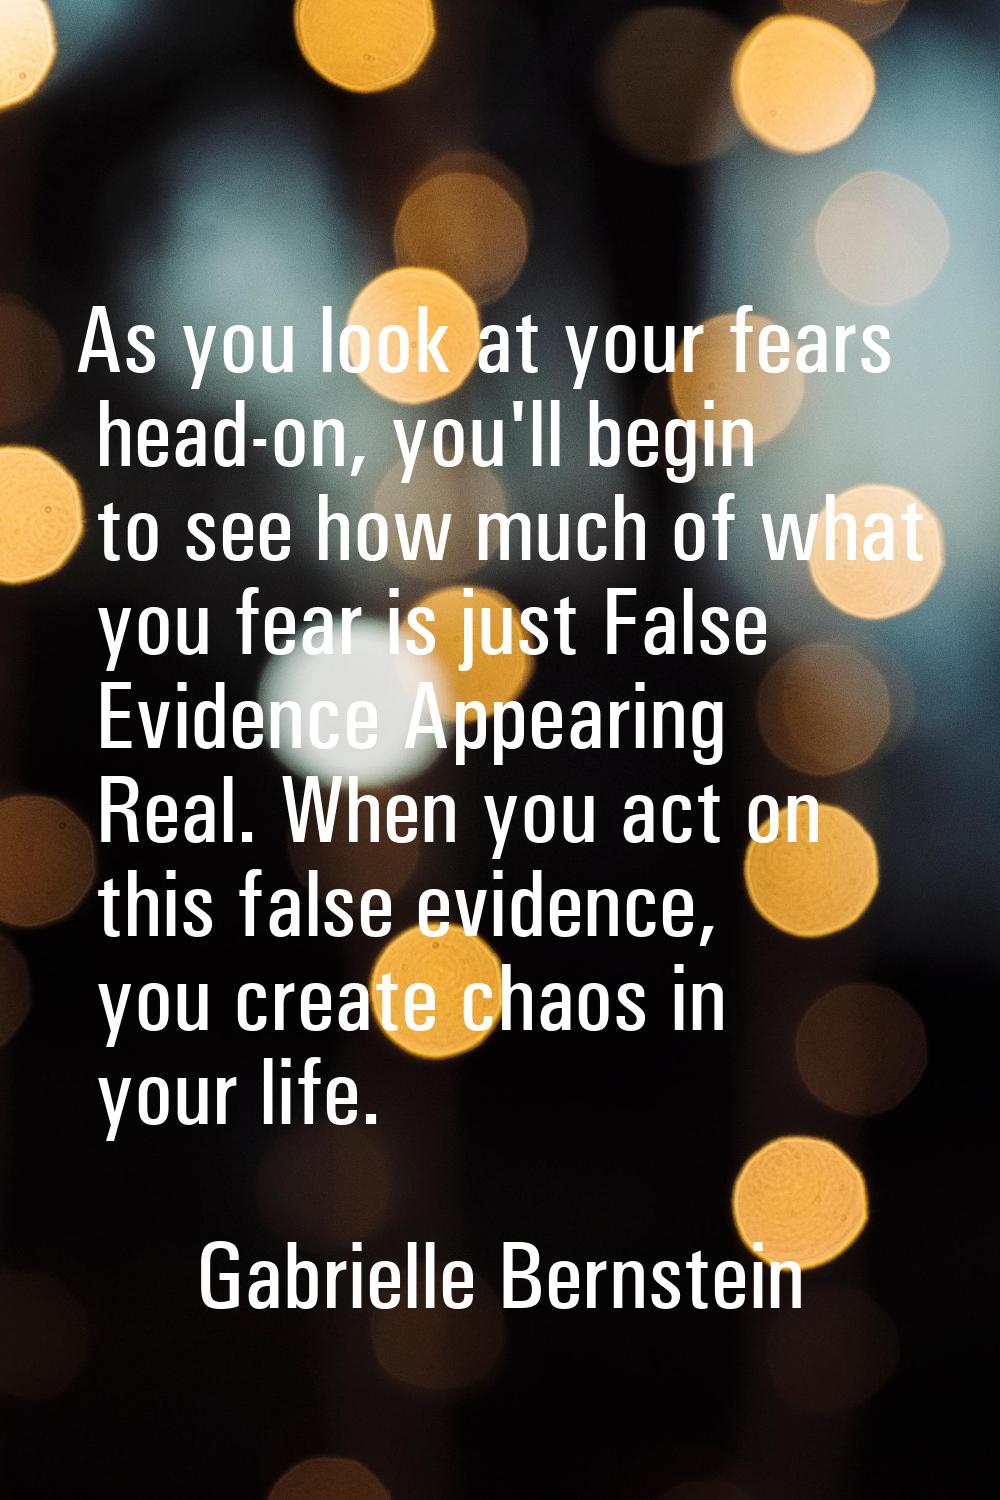 As you look at your fears head-on, you'll begin to see how much of what you fear is just False Evid